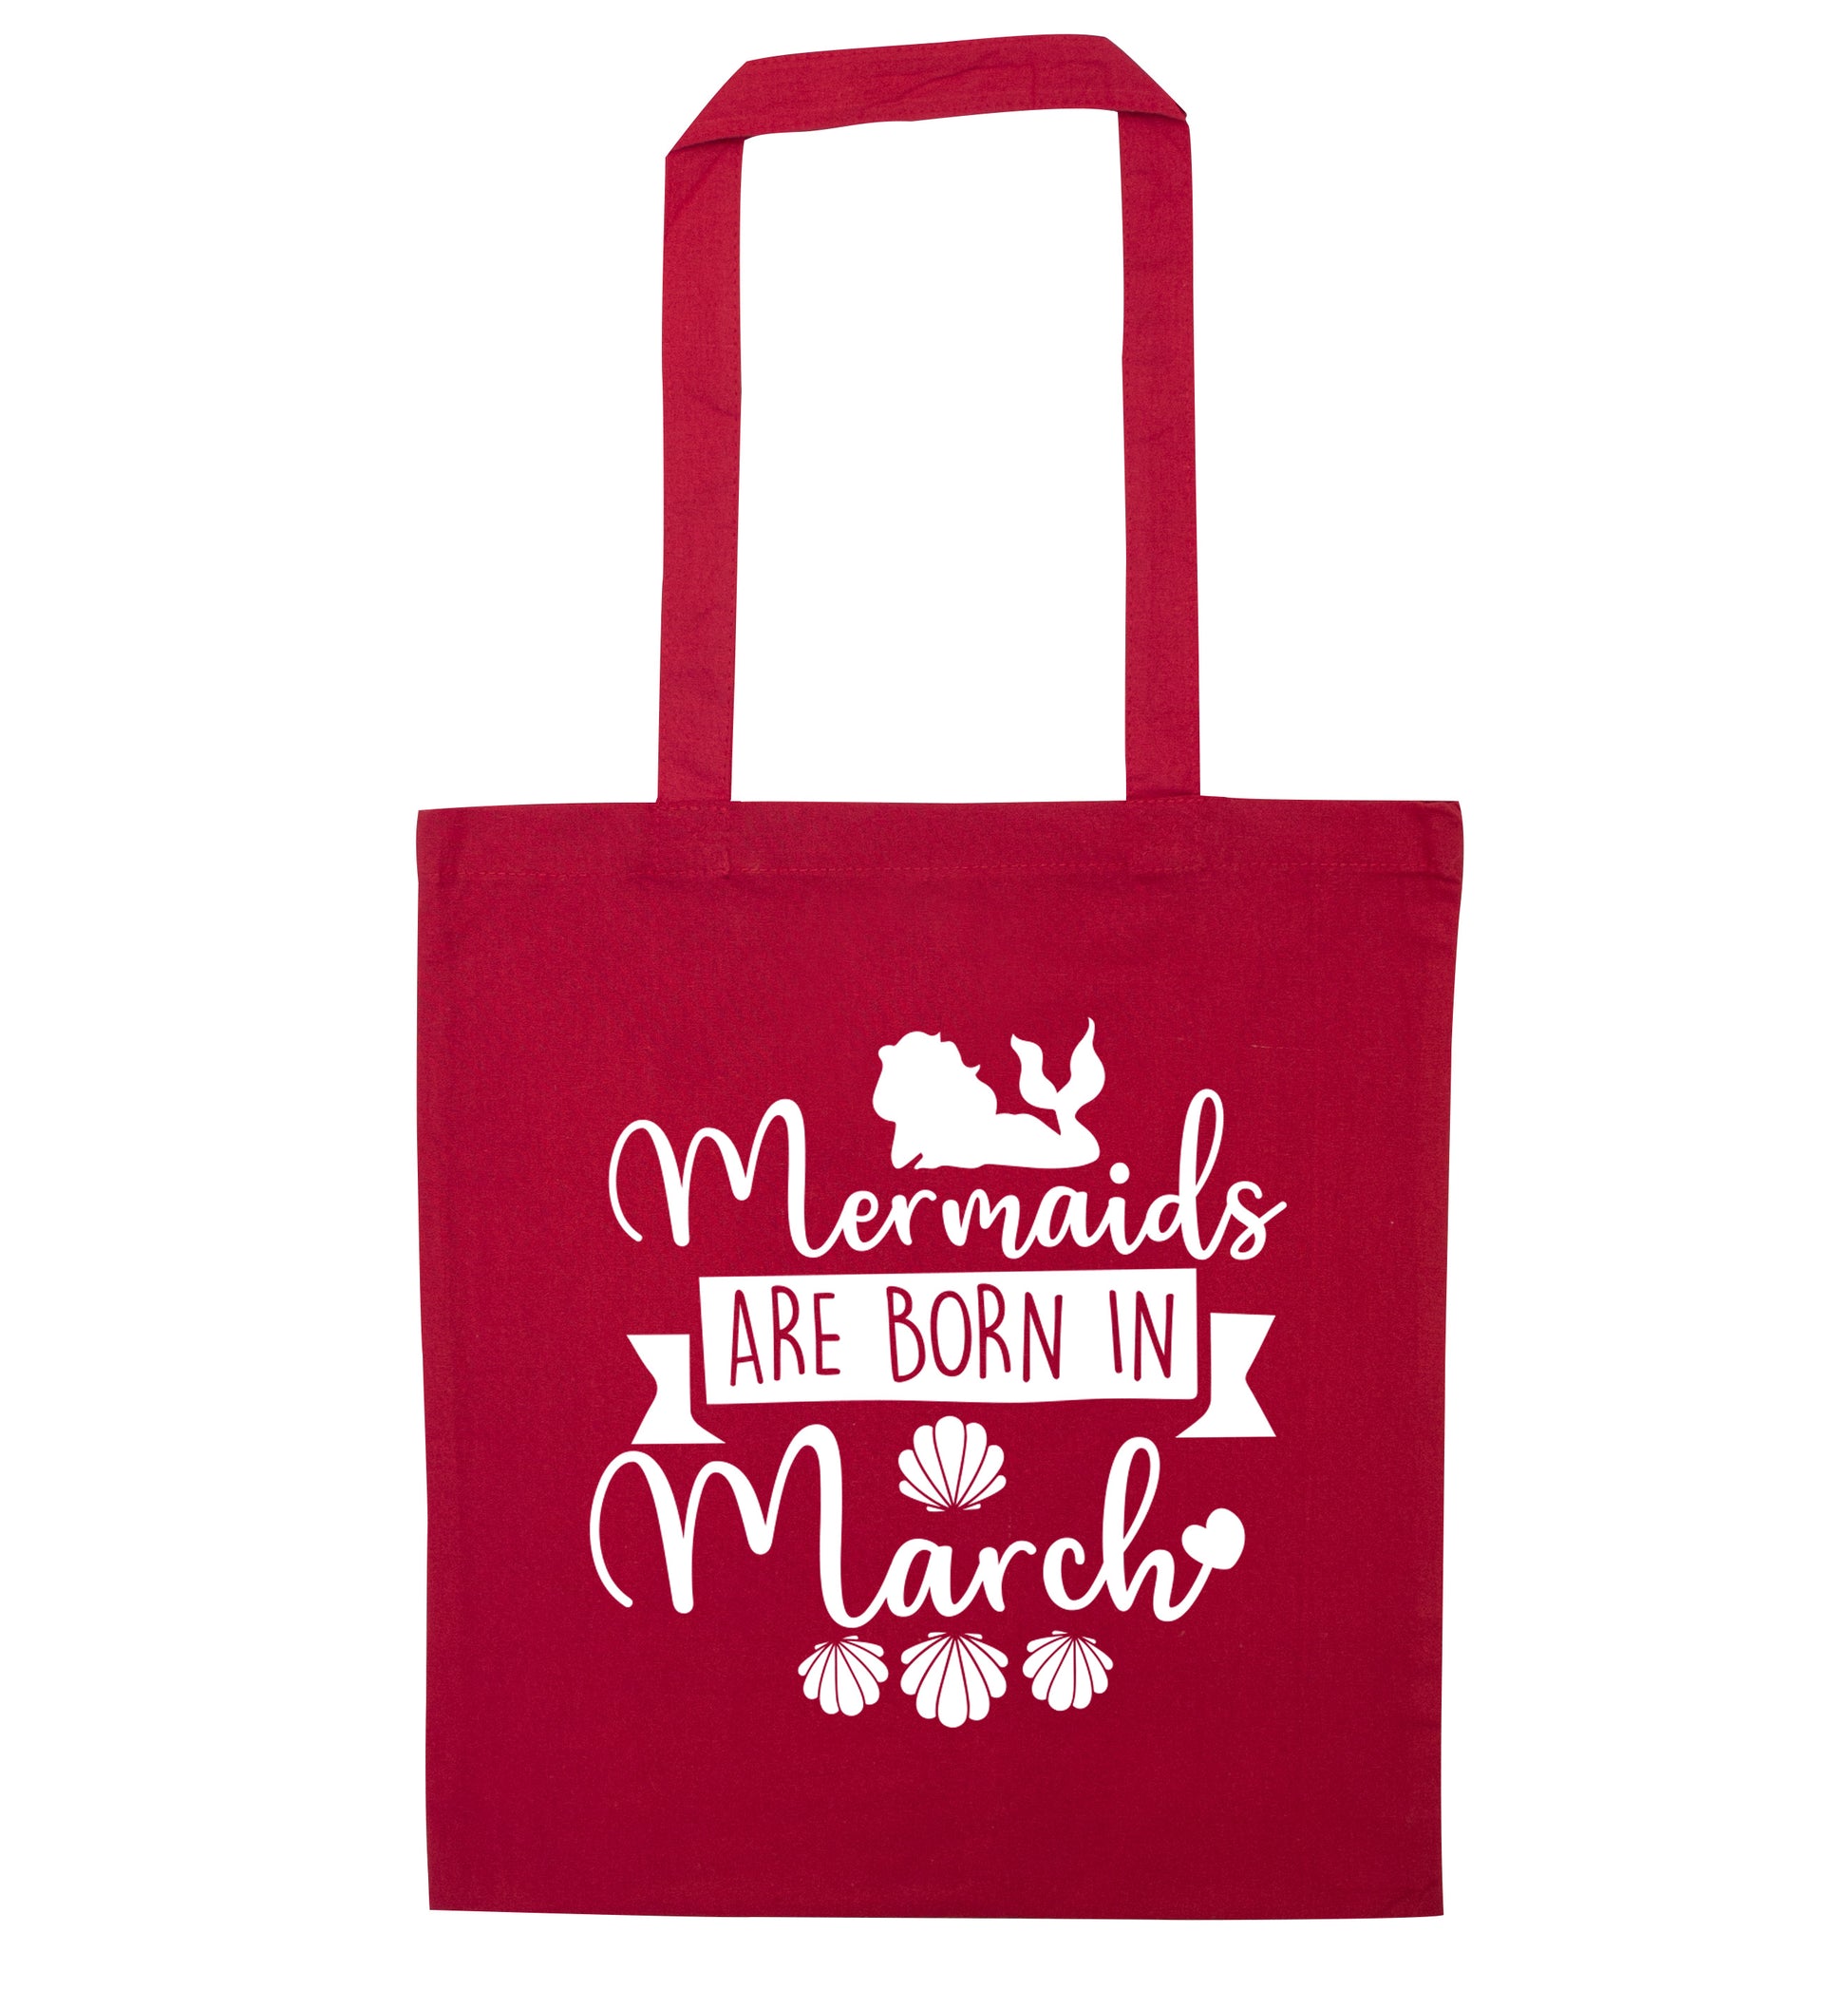 Mermaids are born in March red tote bag